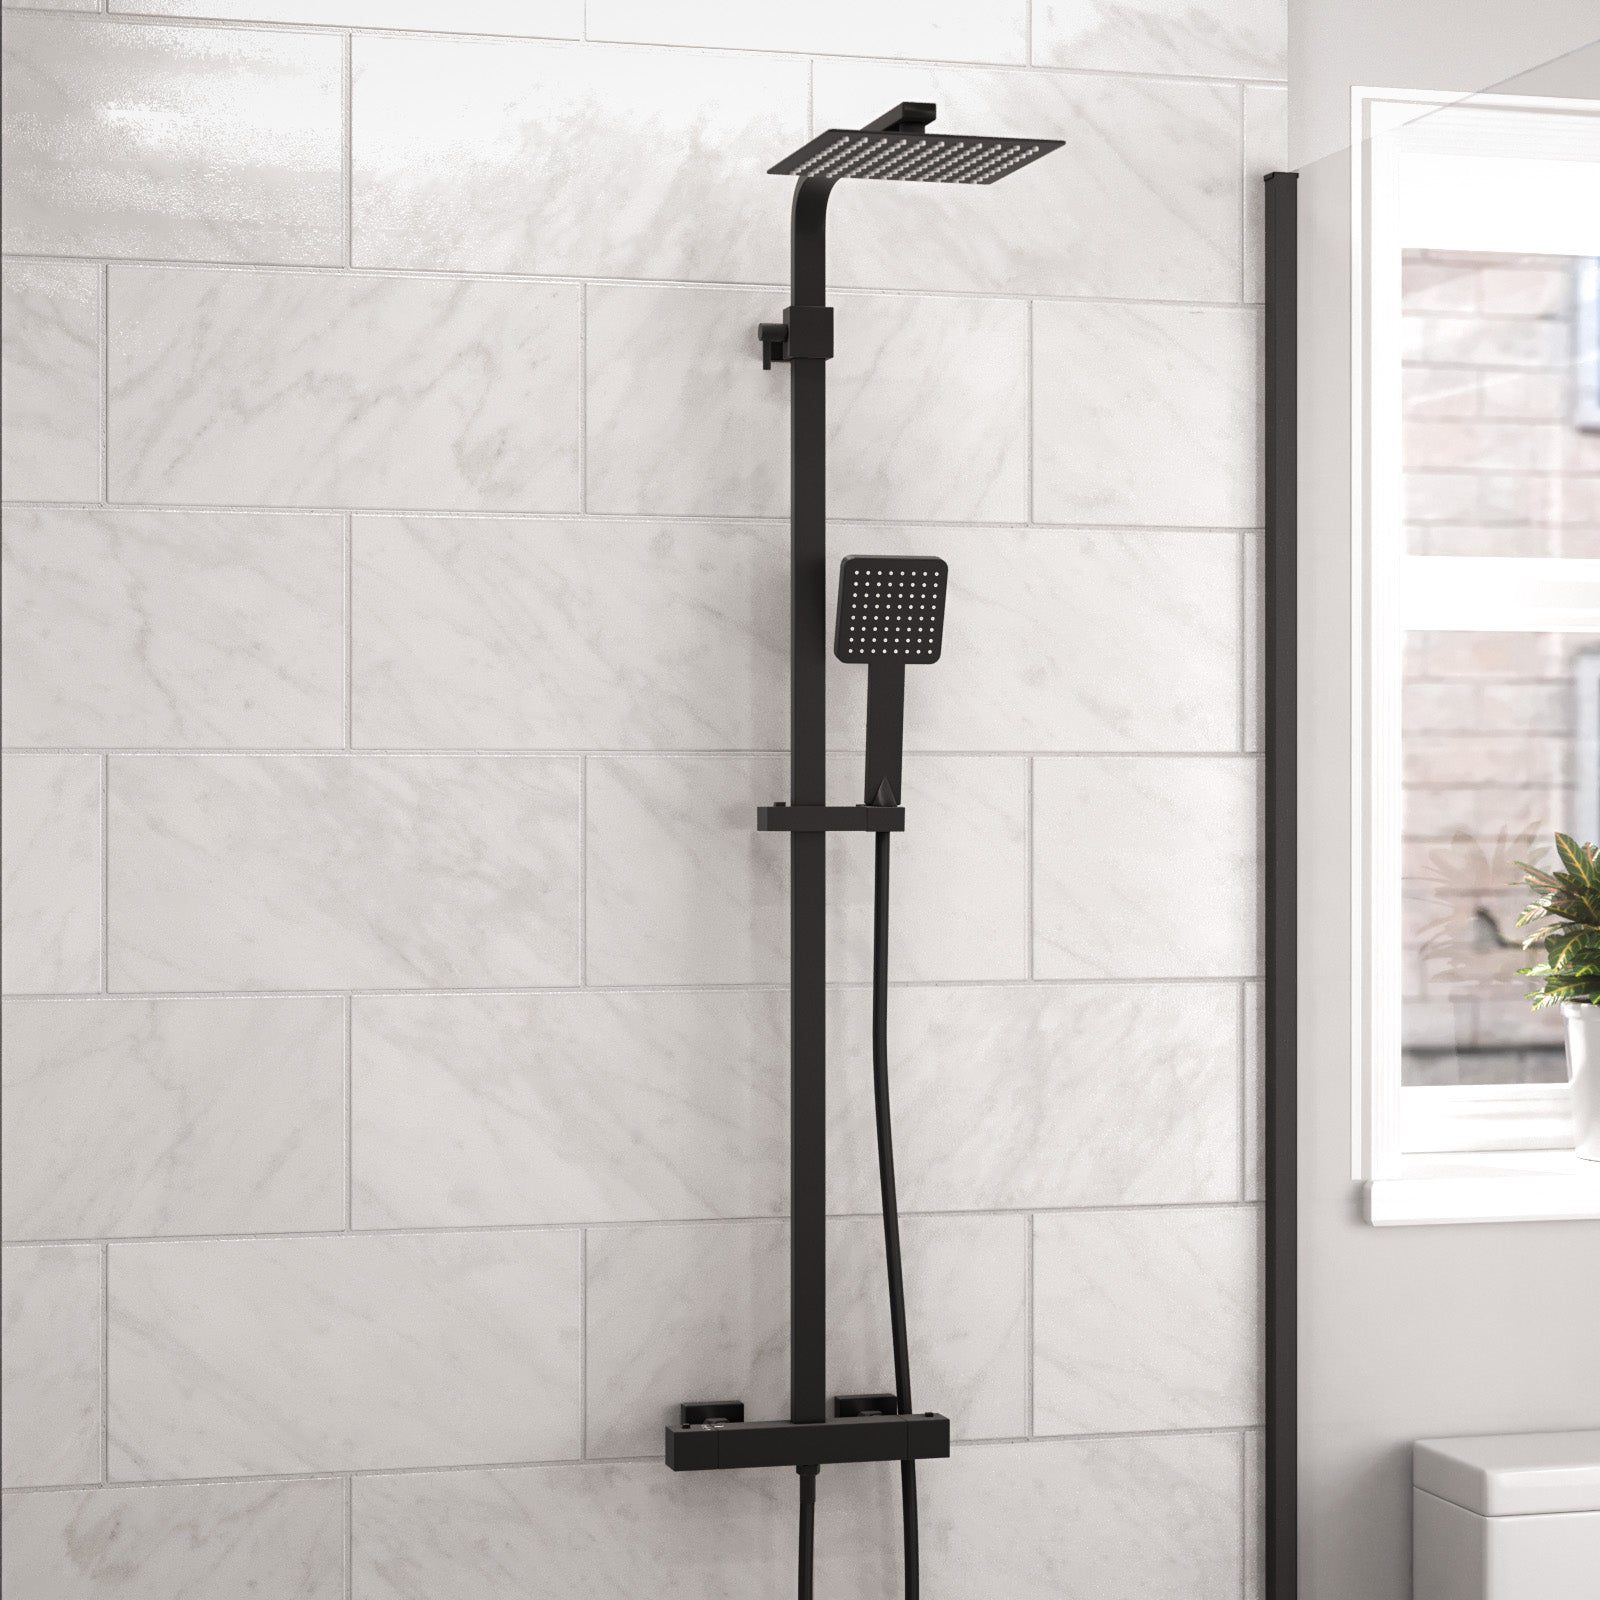 Modern Square Matte Black Exposed Thermostatic Mixer Shower Set With Shower Head and Handheld